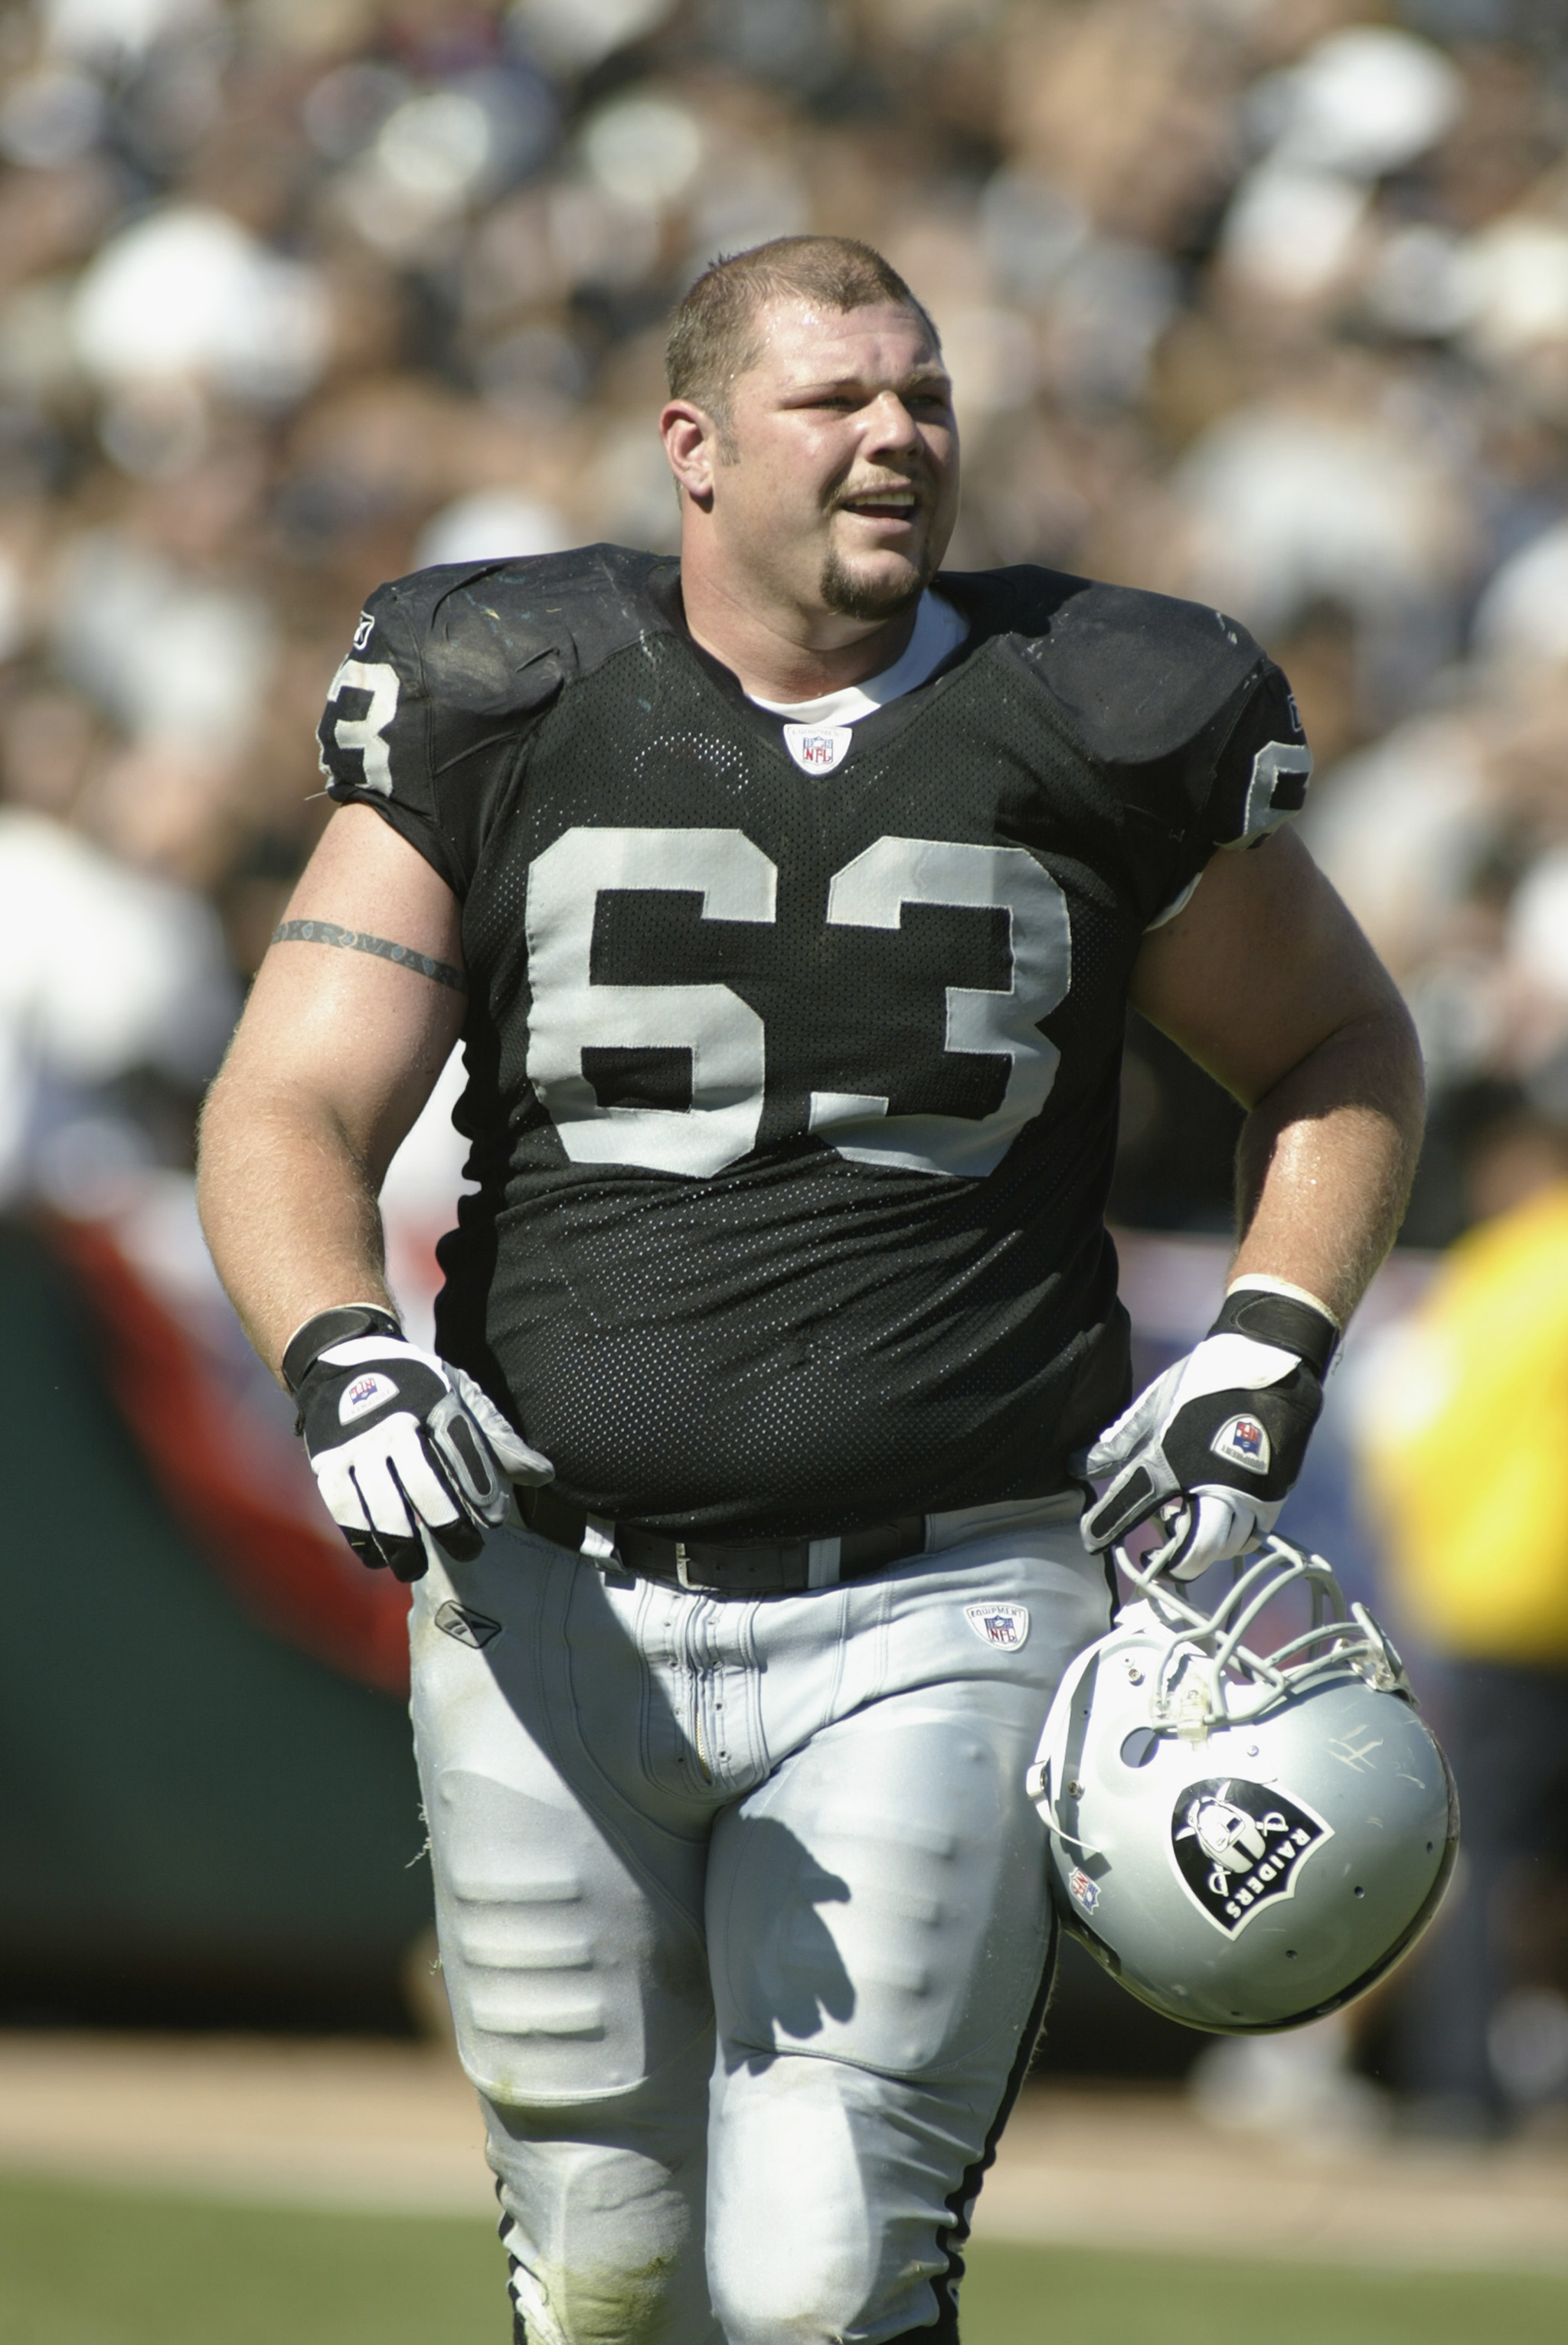 OAKLAND, CA - SEPTEMBER  8:  Center Barret Robbins #63 of the Oakland Raiders walks on the field during the game against the Seattle Seahawks on September 8, 2002 at Network Associates Coliseum in Oakland, California. The Raiders won 31-17. (Photo By Scot